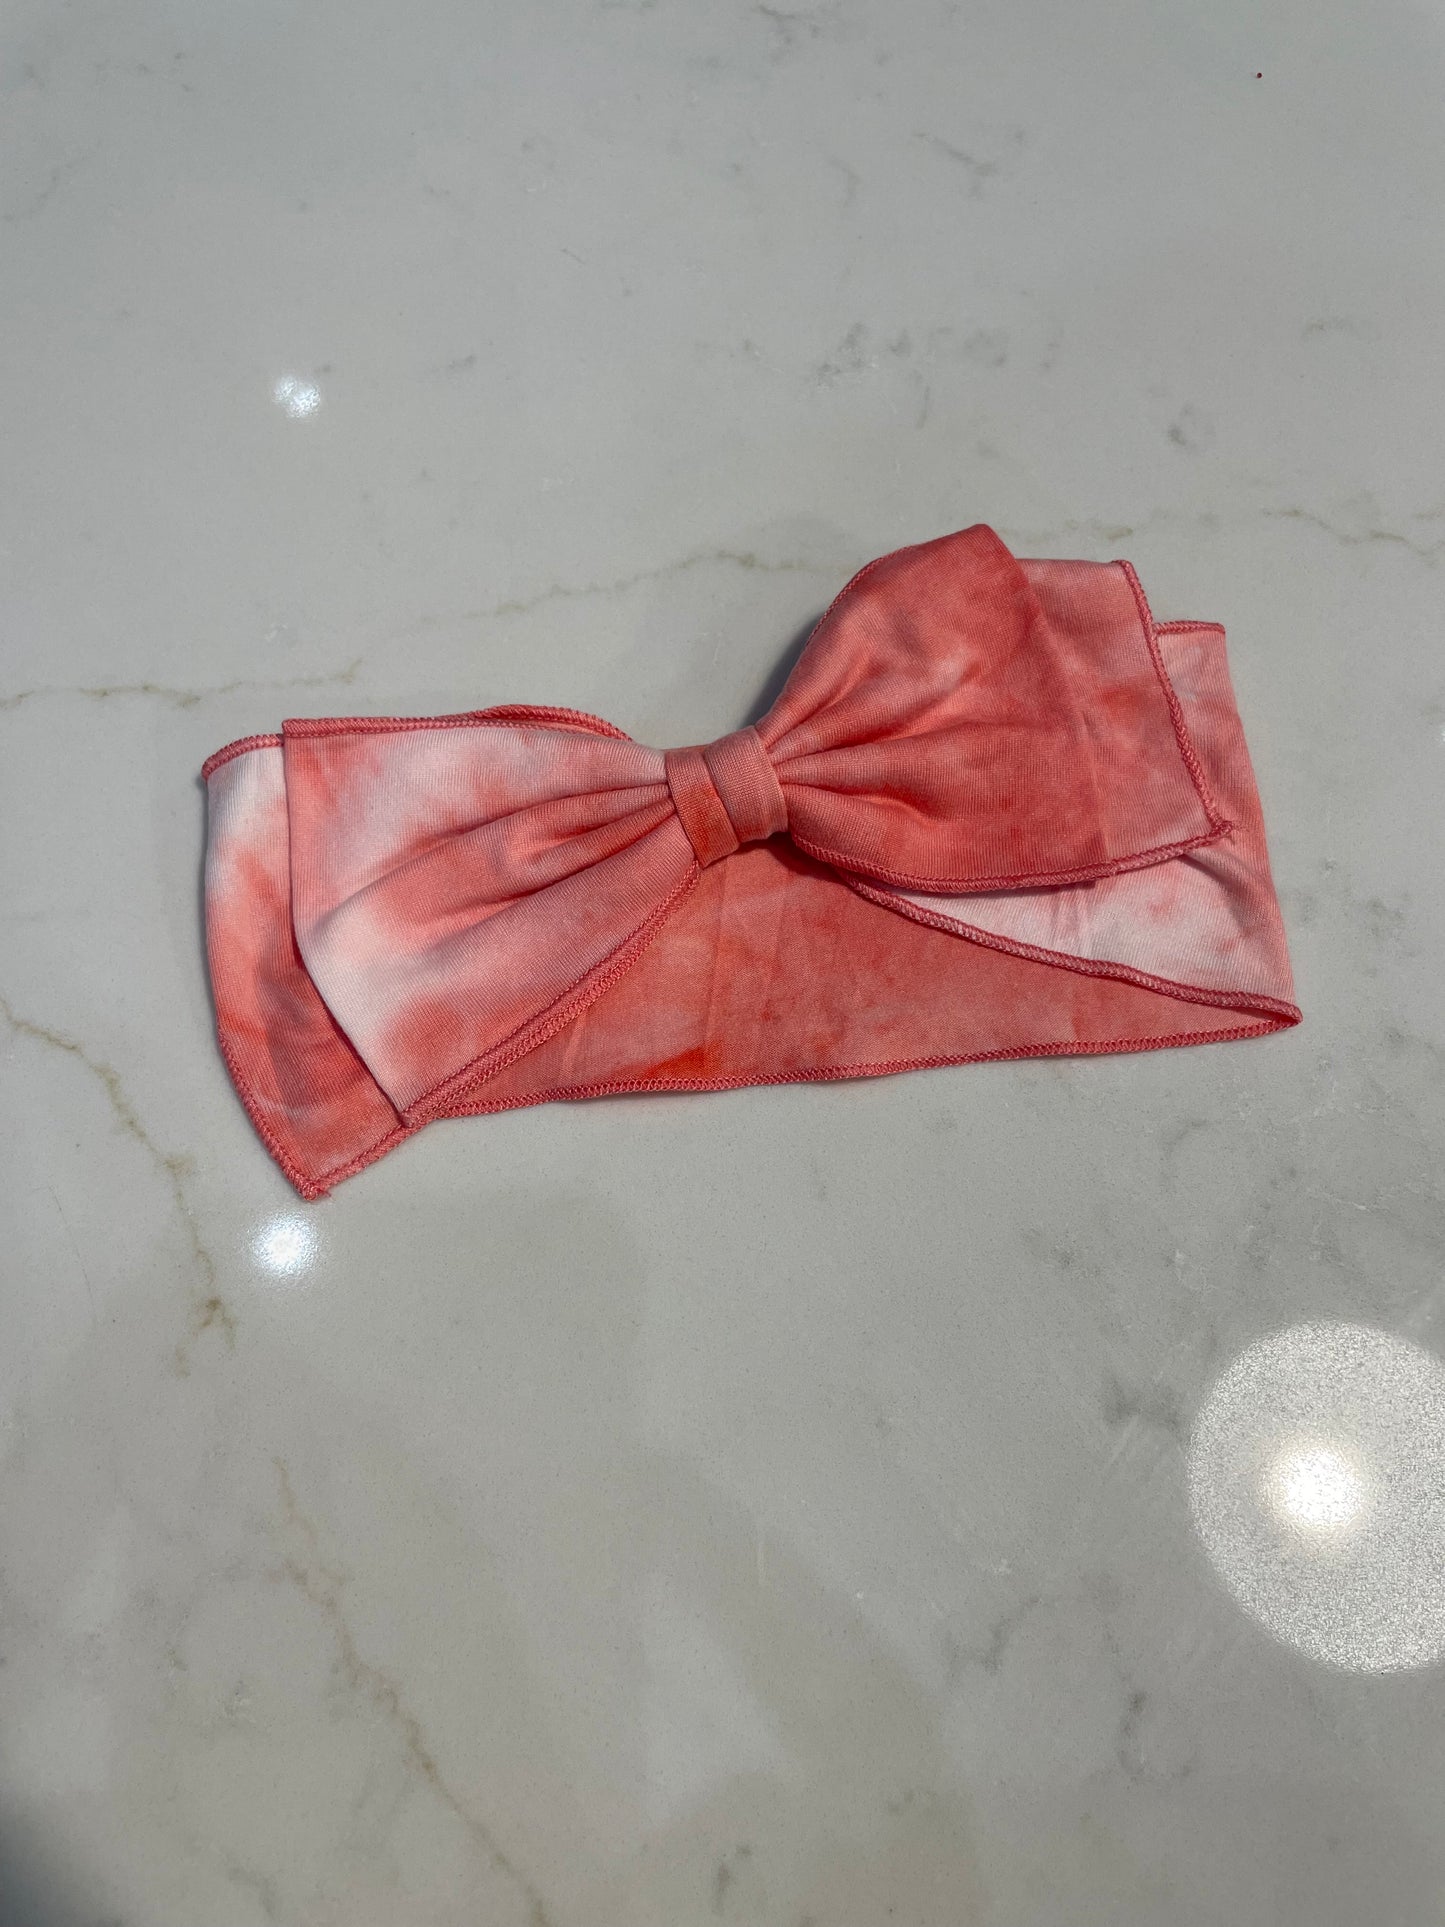 Strawberry Cloud Hair Accessories